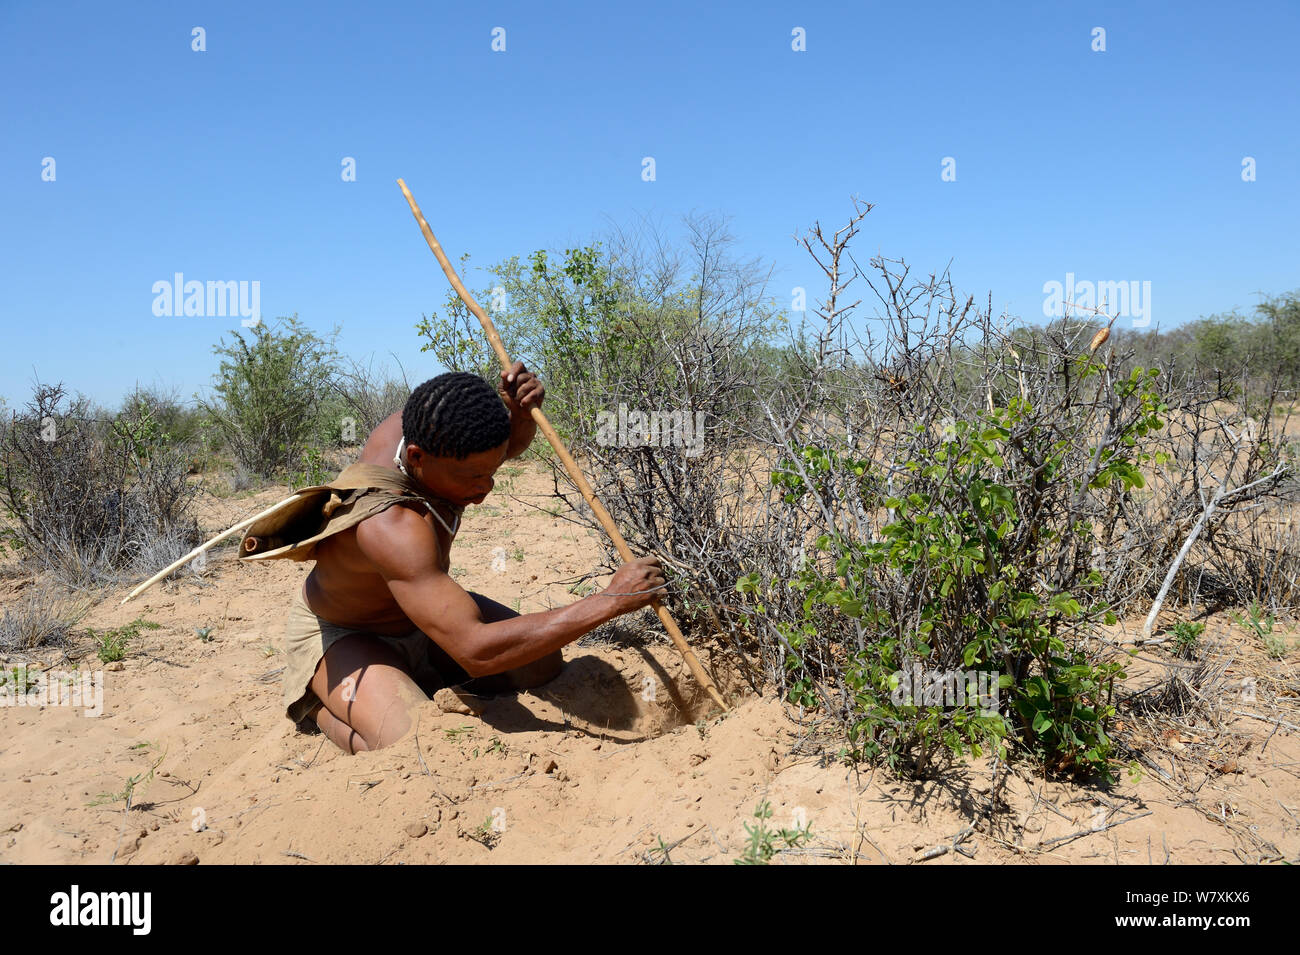 Naro San Bushman digging out a milkplant root (Raphionacme sp) to drink the juice contained in its fibers. Kalahari, Ghanzi region, Botswana, Africa. Dry season, October 2014. Stock Photo